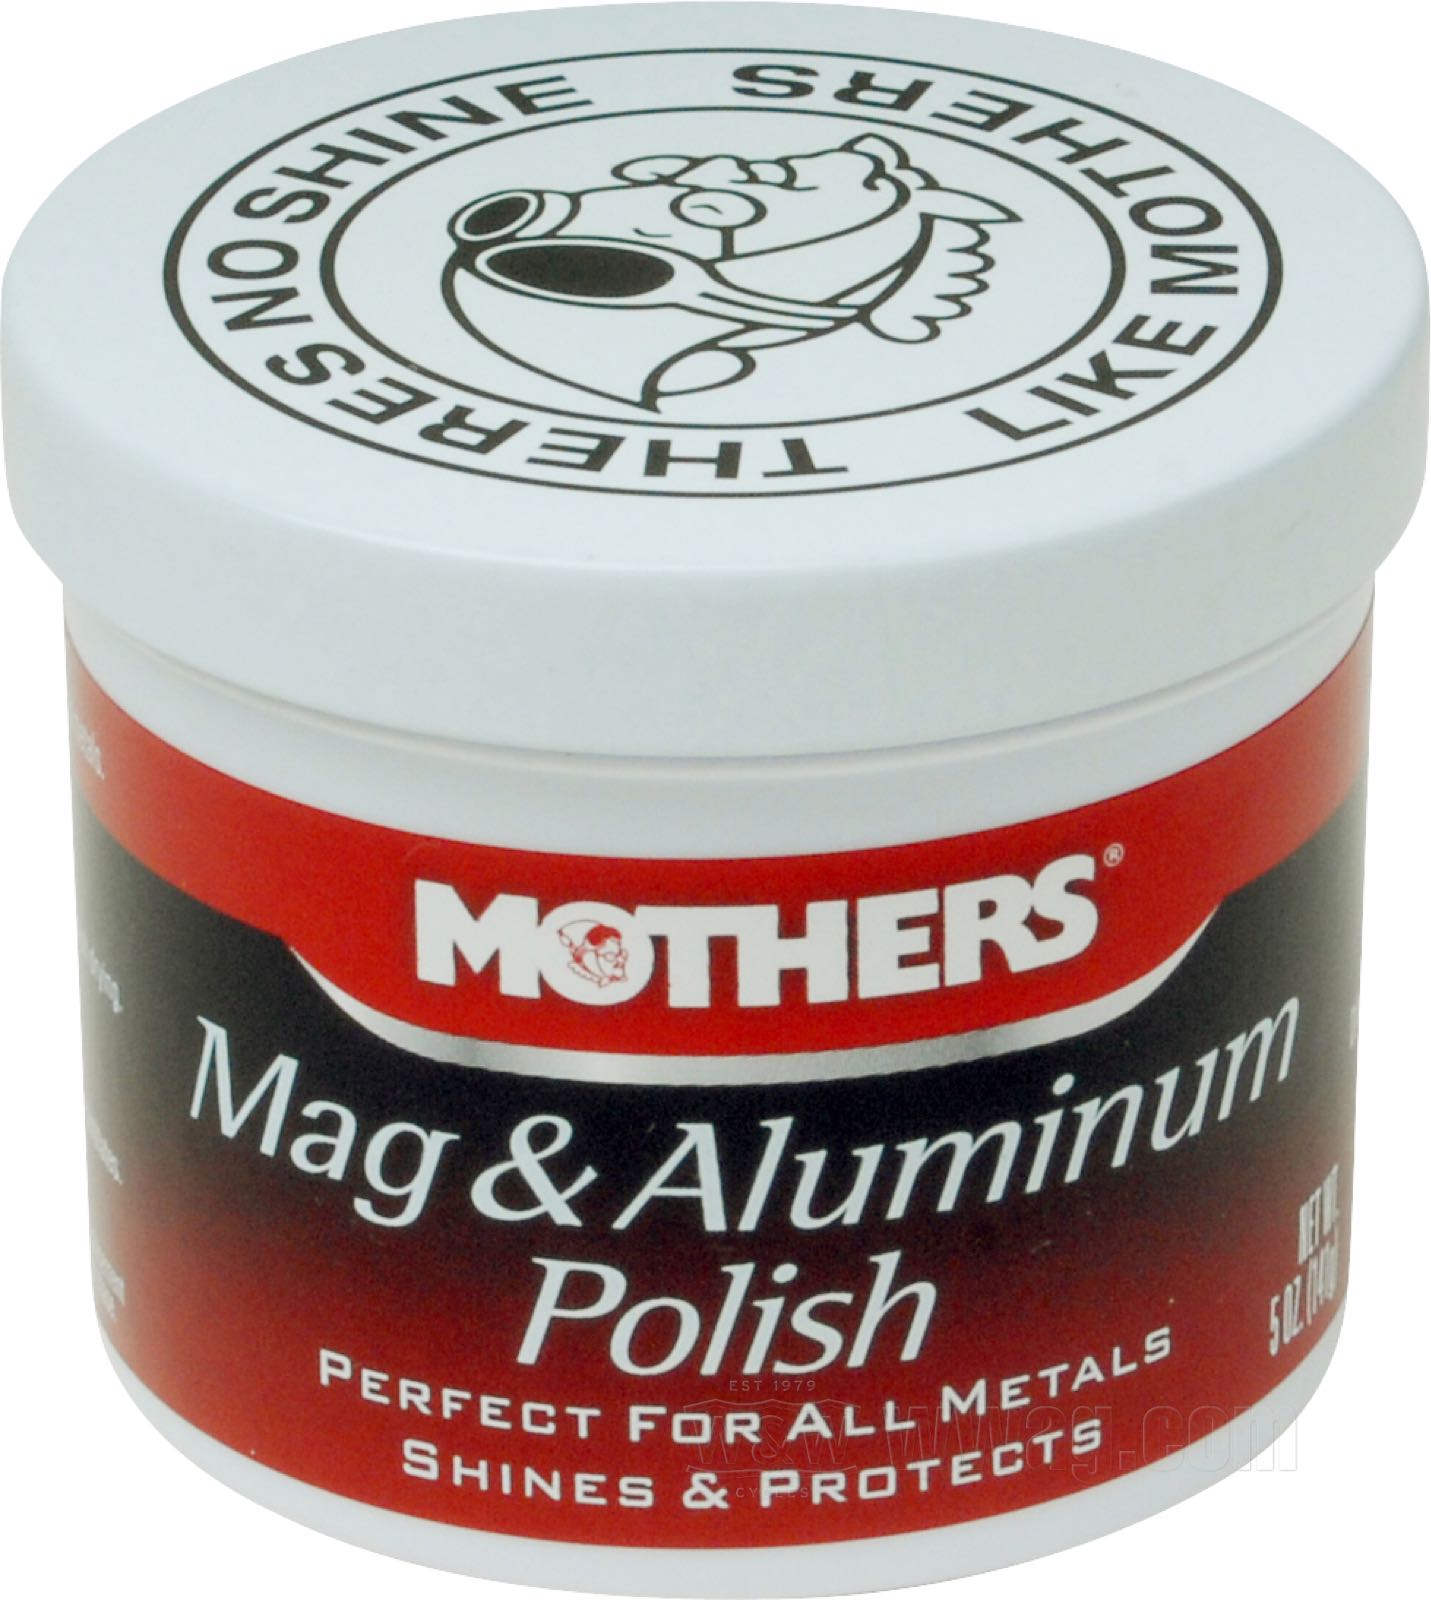 Polish »Mag and Aluminum« by Mothers